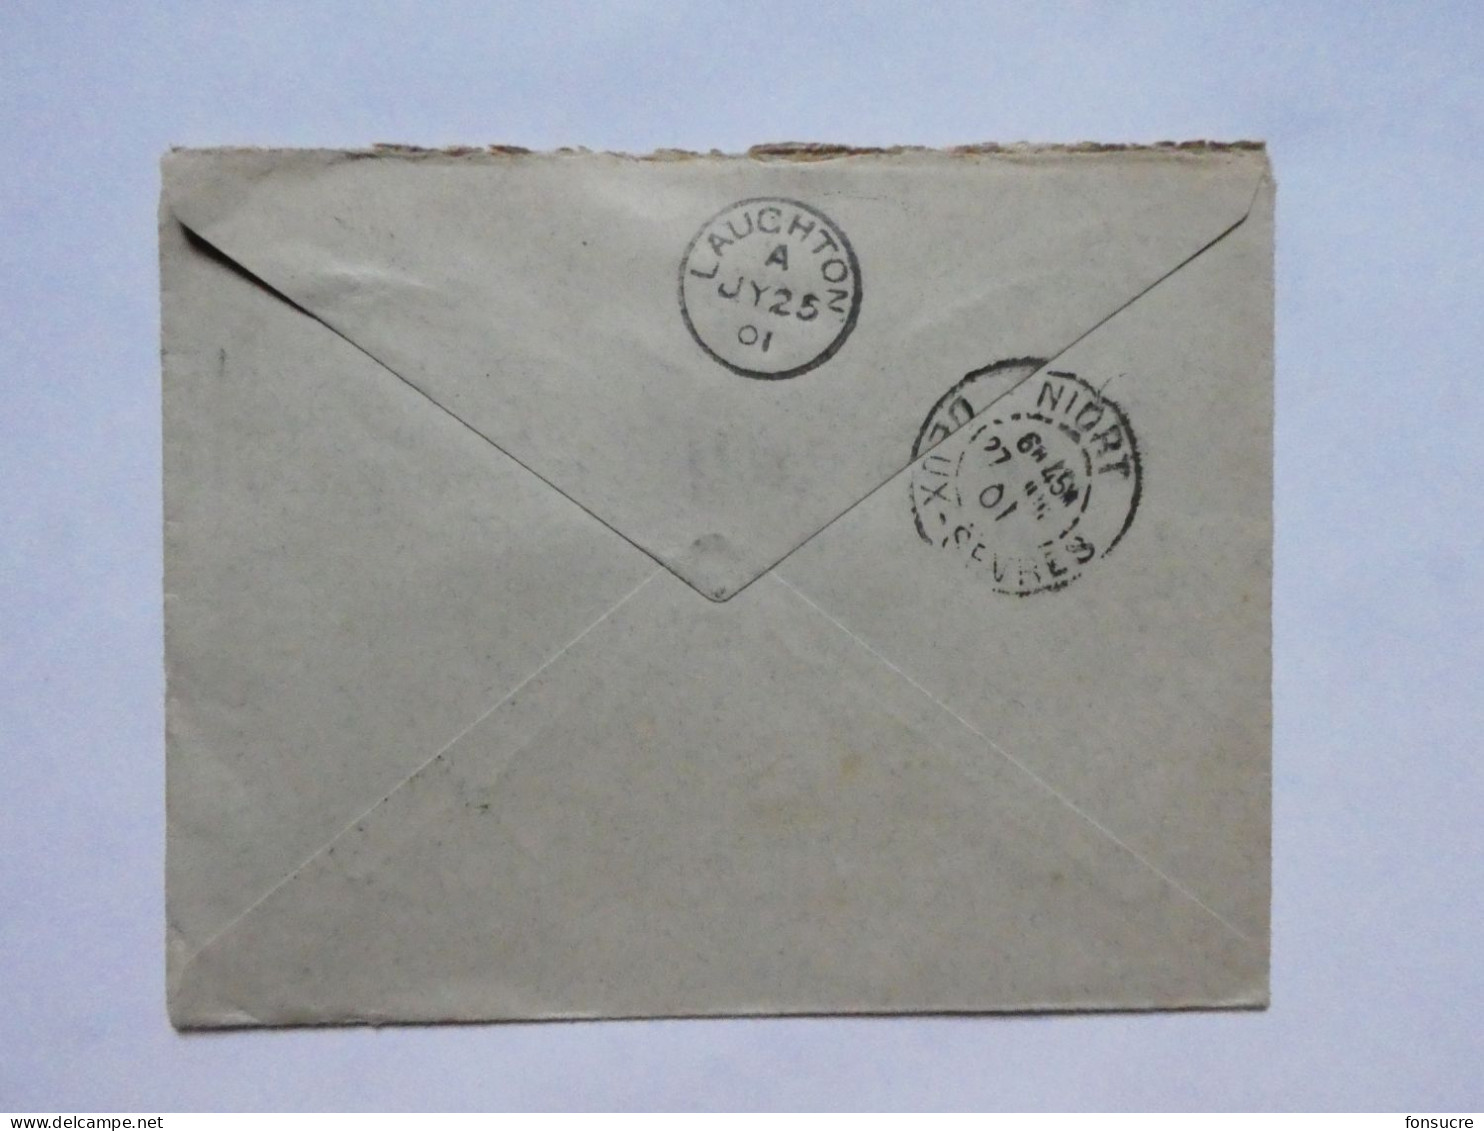 O14 Angleterre Enveloppe One Penny Hawkhurst + T 15 Pour France Taxe 30 Verso Cachet Lauchton + Niort 1901 - Covers & Documents